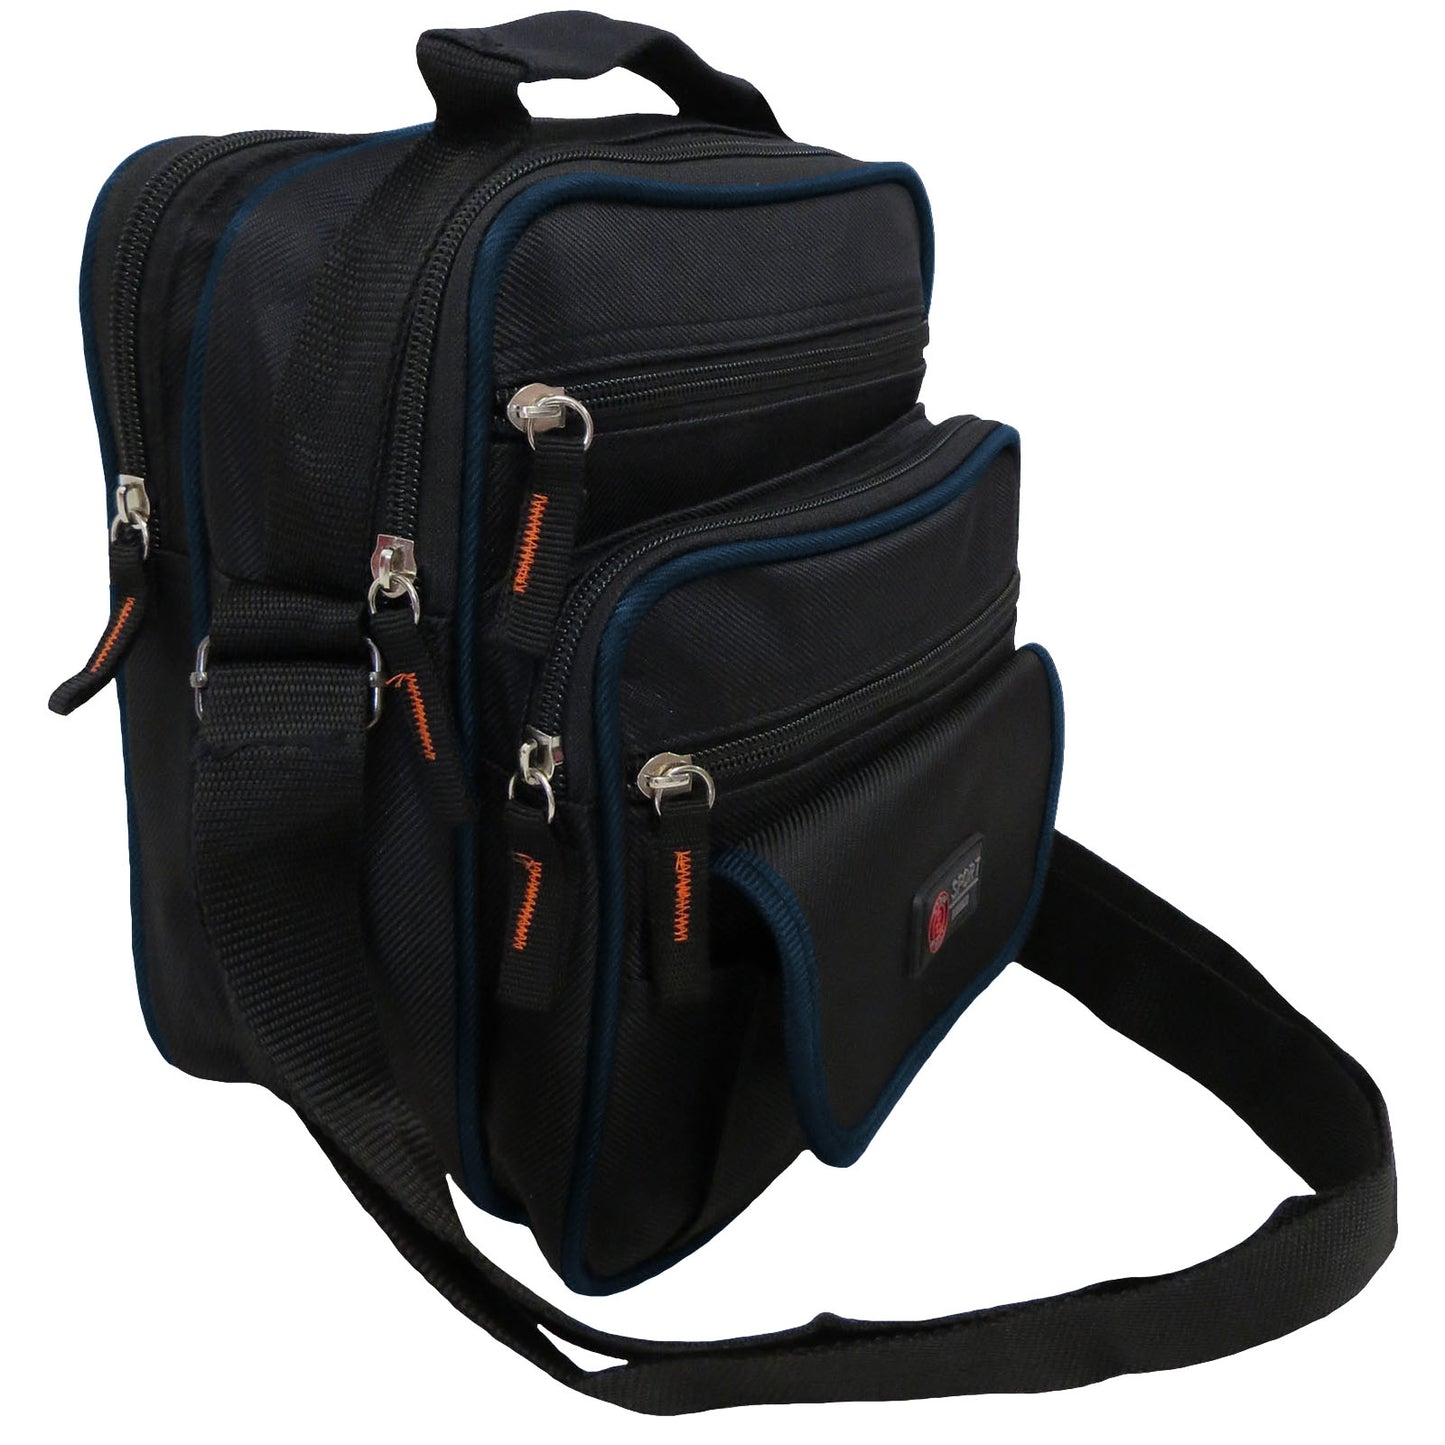 wholesale messenger bag in black with blue trim with a phone pocket